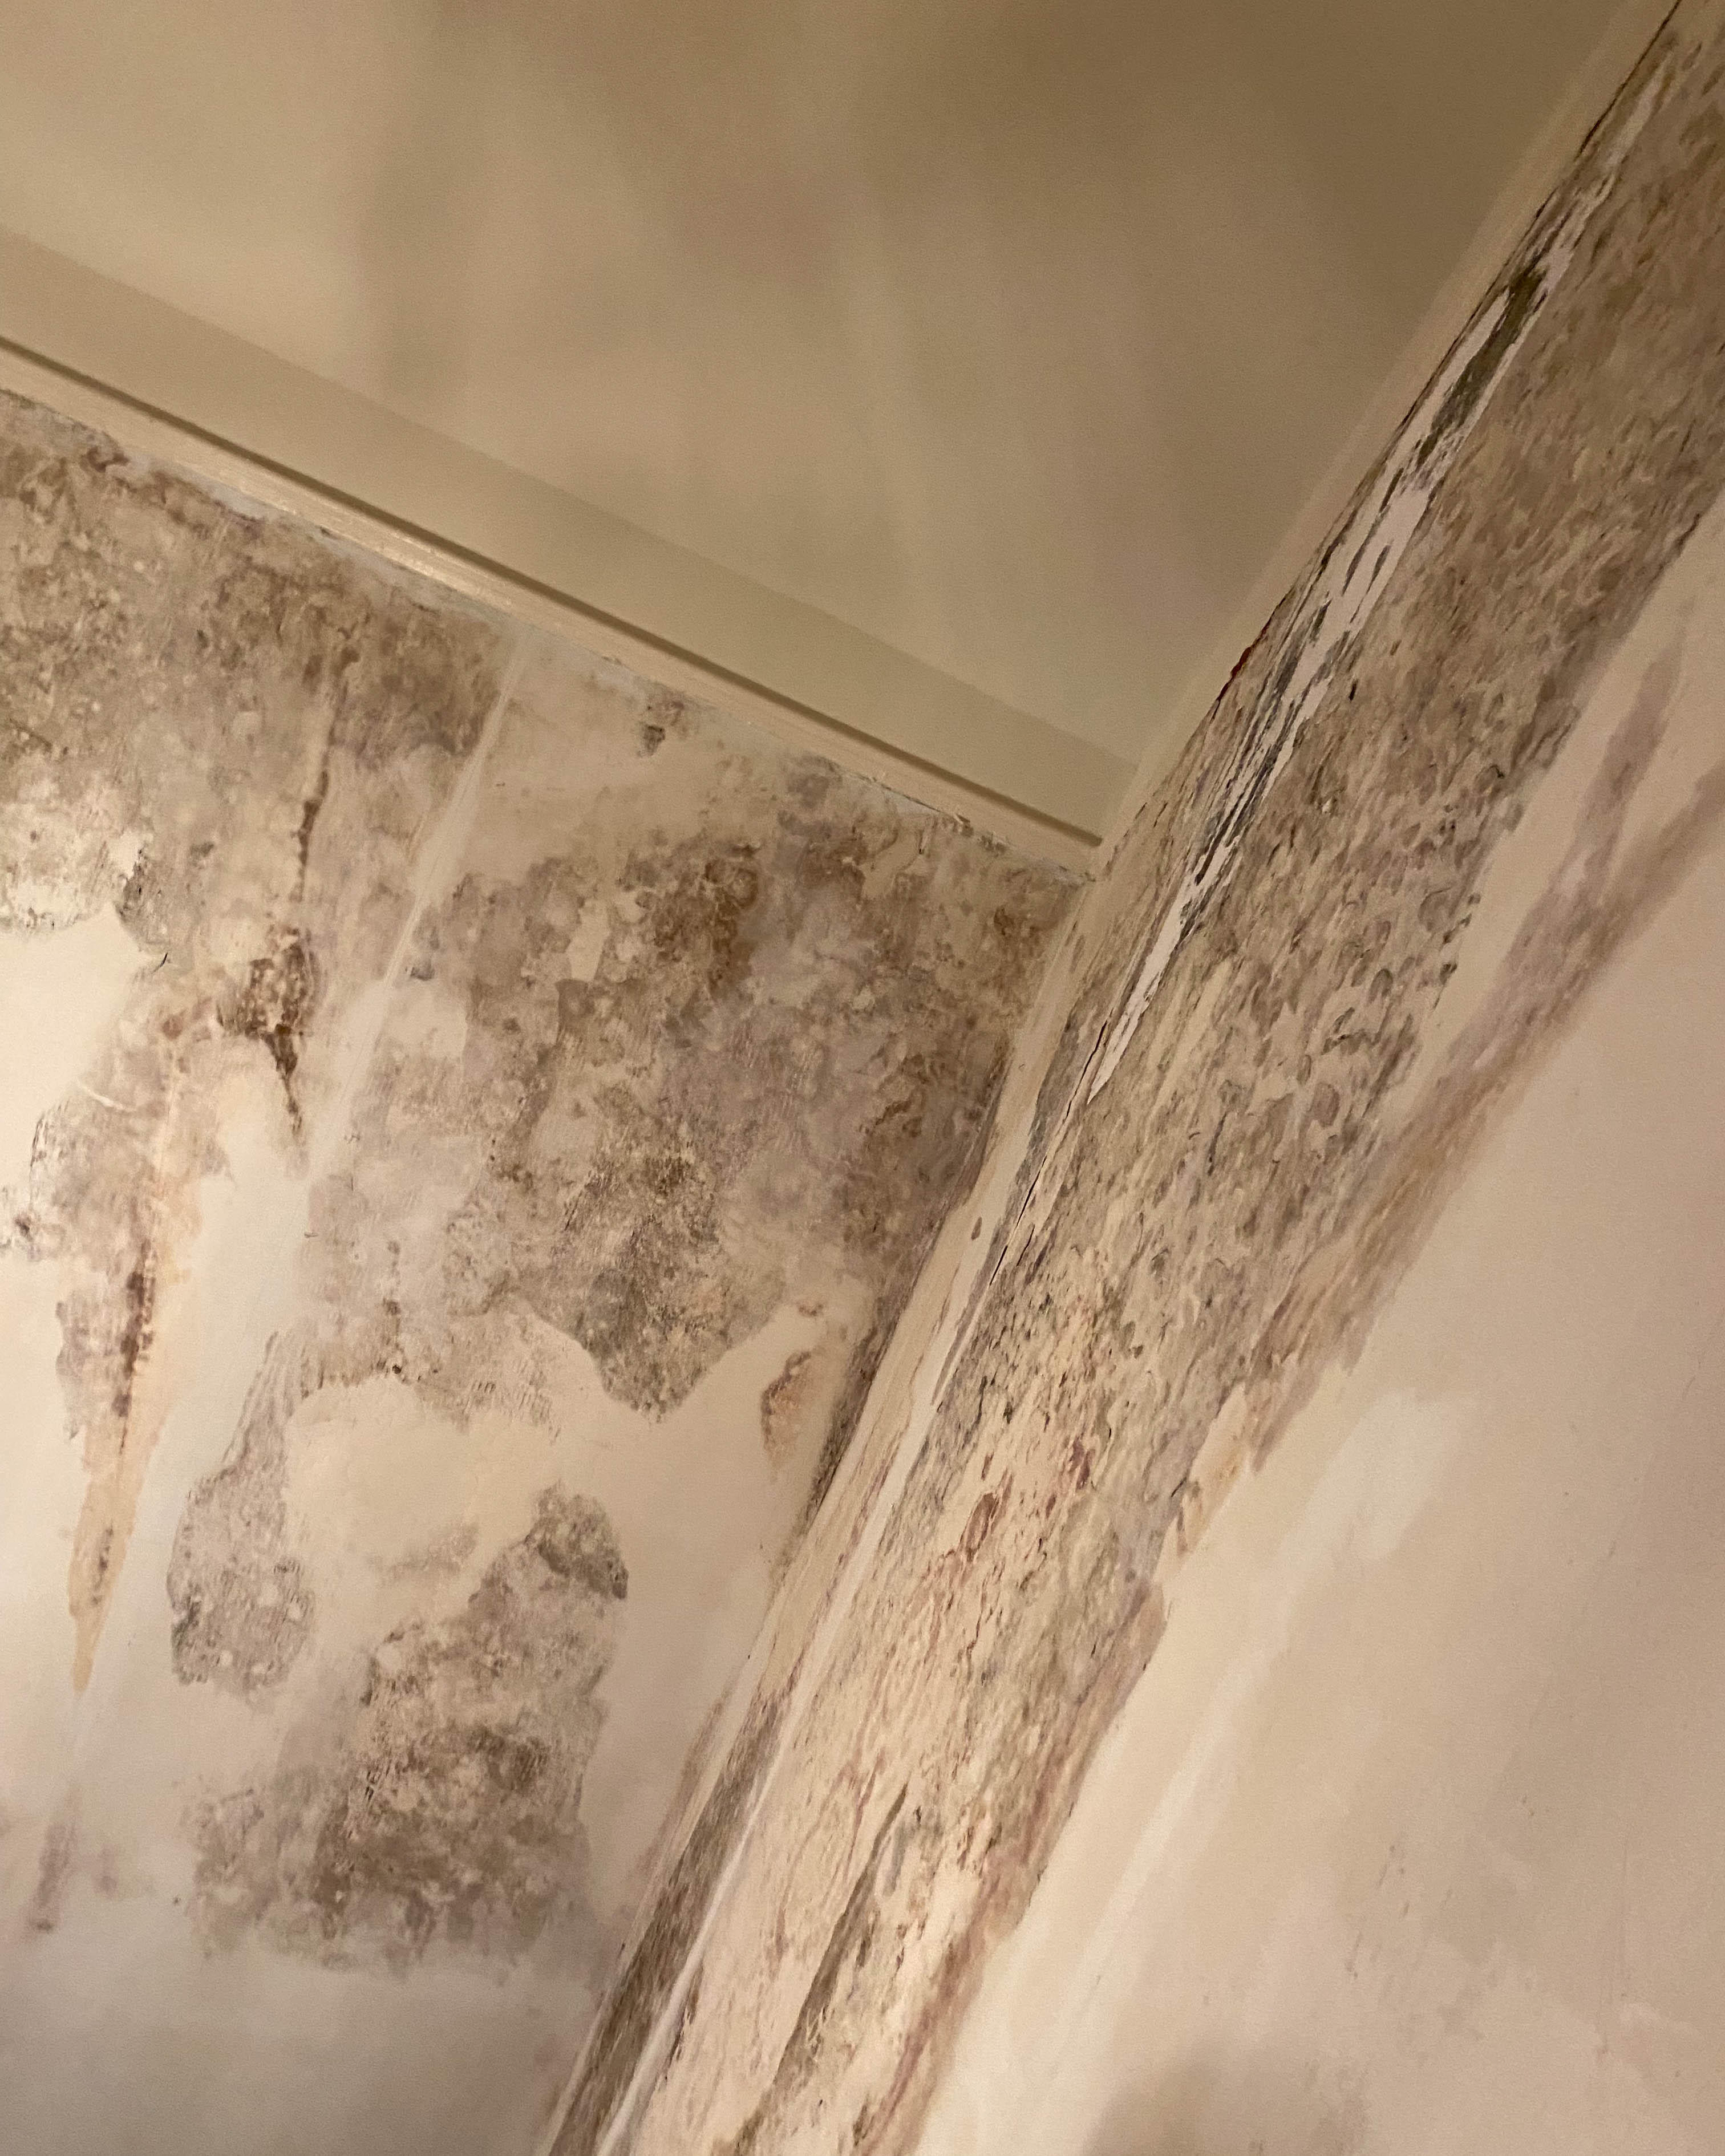 It's possible to discover mold in unexpected places after water damage. Mold will grow and spread if you ignore it. Rely on SERVPRO of St. Louis County NW for all of your mold damage cleanup and remediation needs in Creve Coeur, MO. Give us a call!